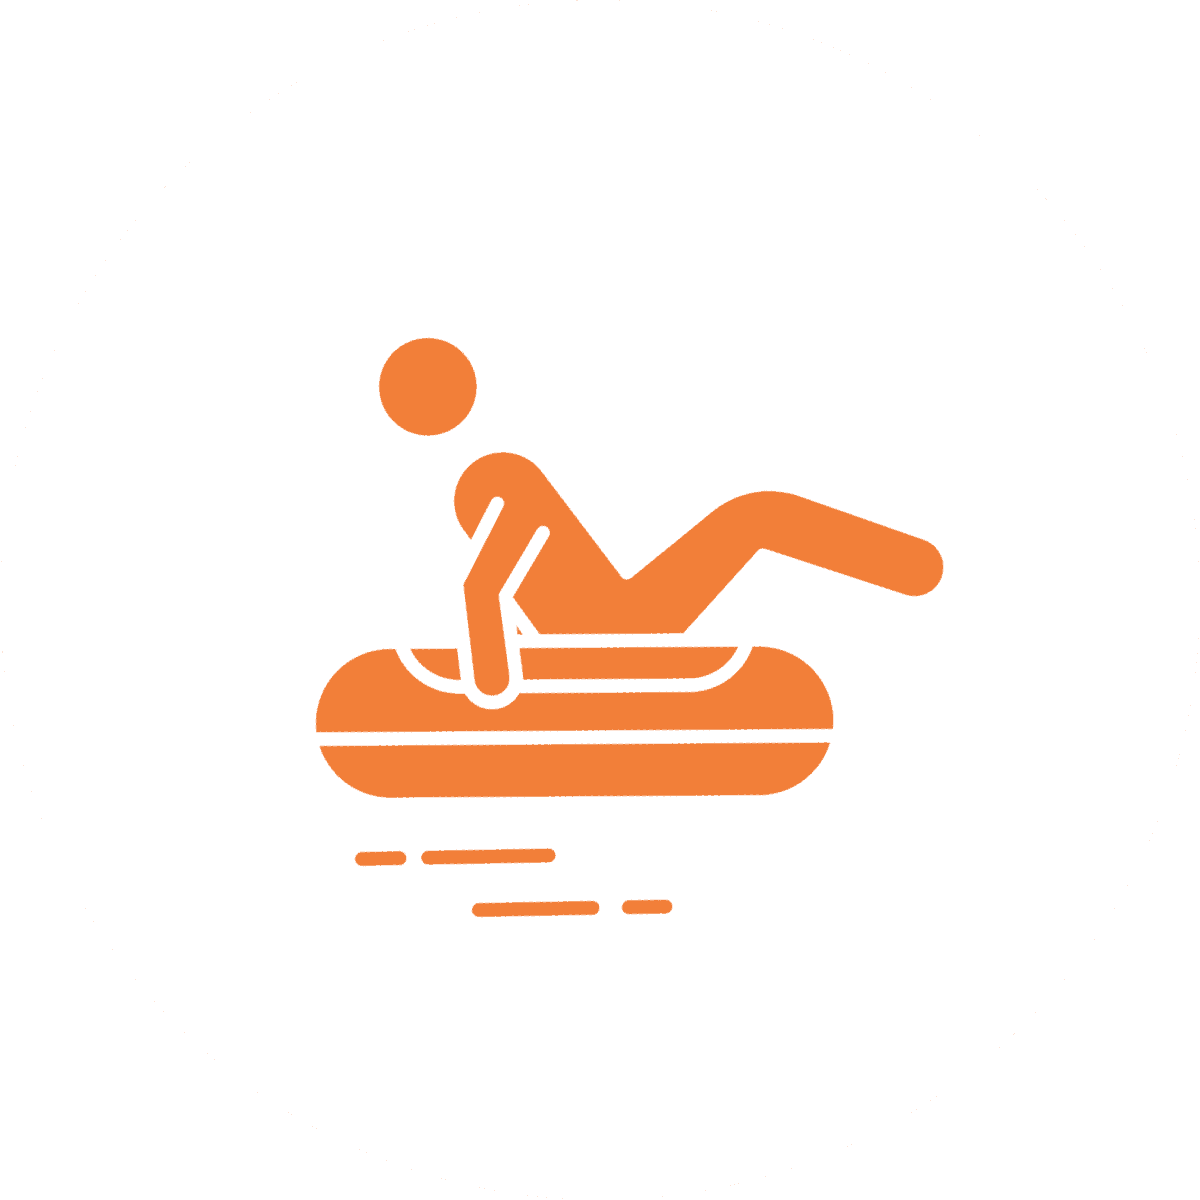 icon showing person in raft on the water